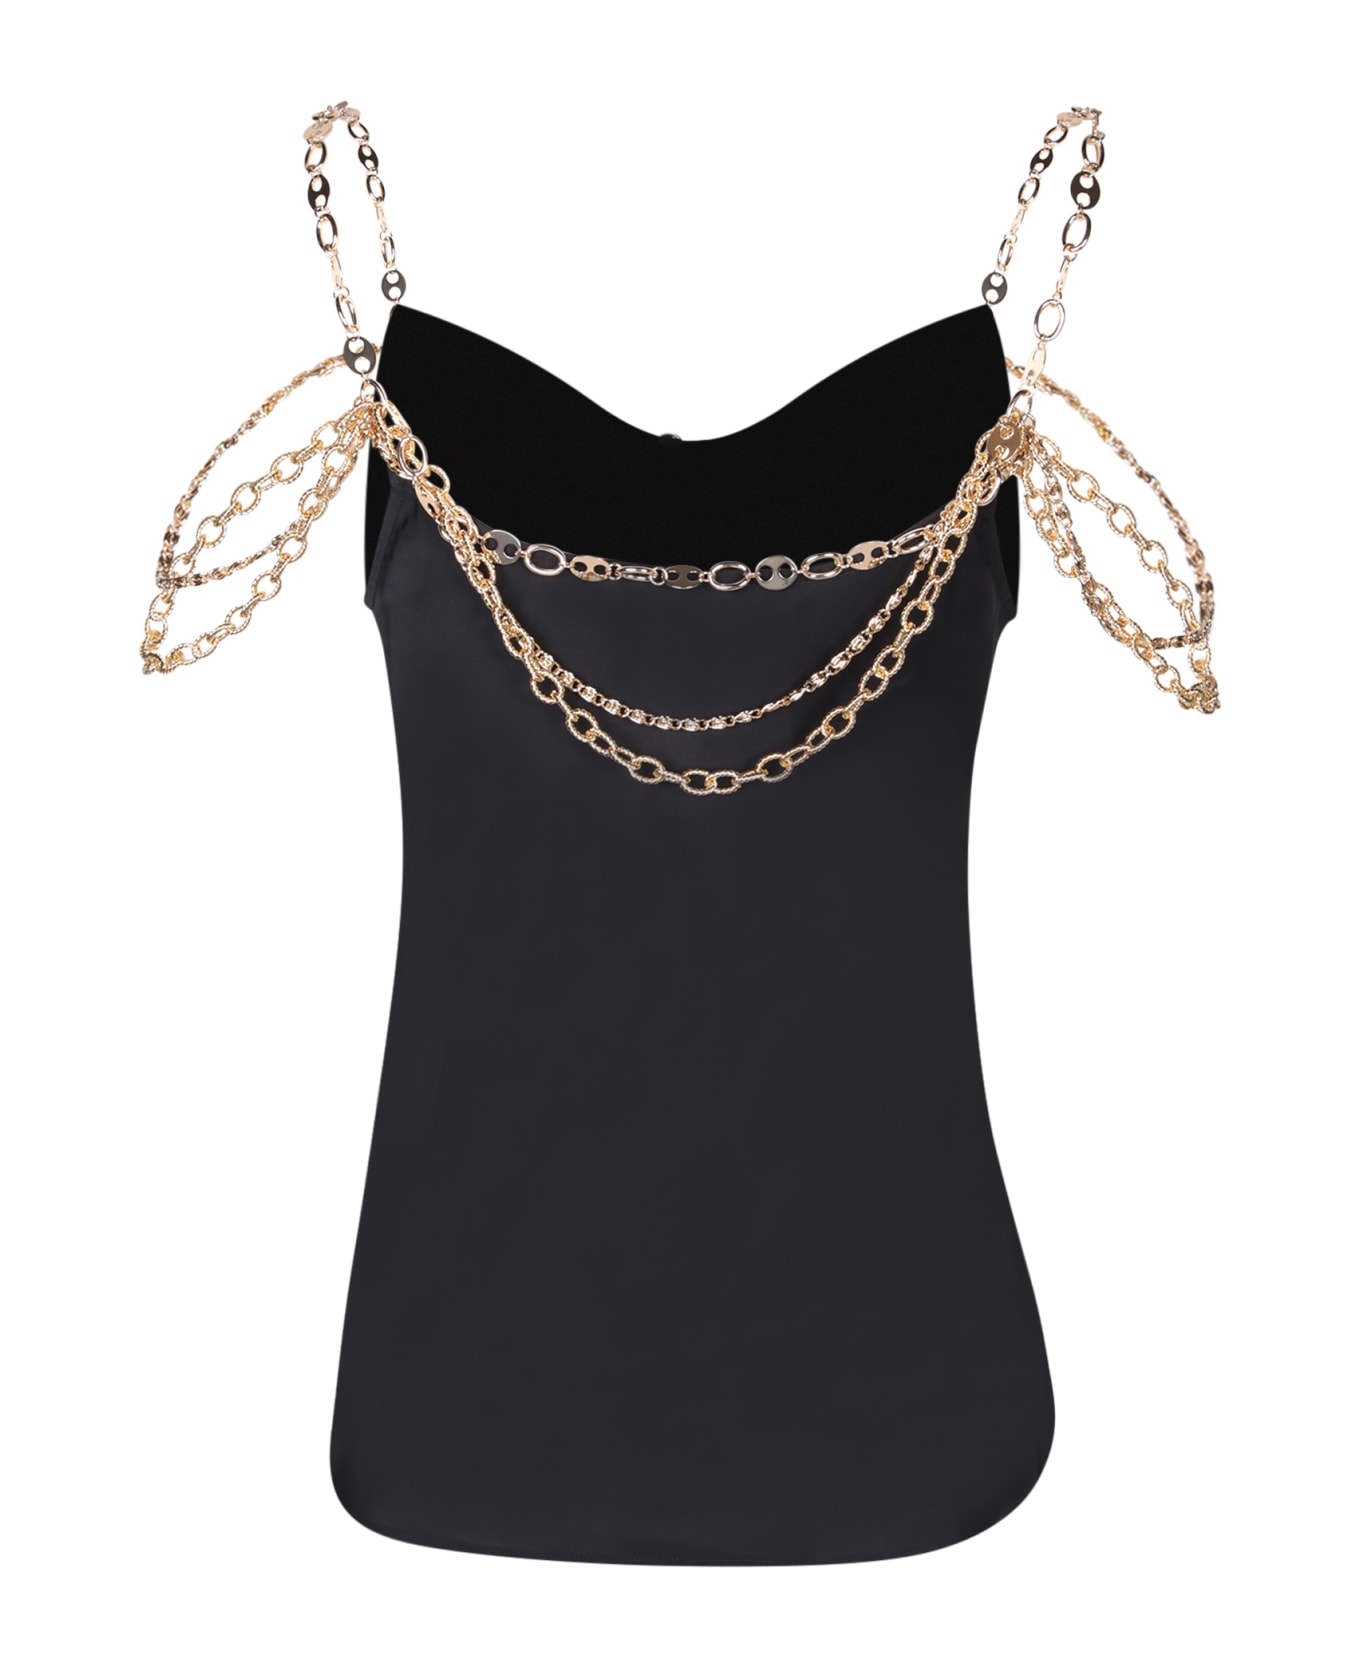 Paco Rabanne Rabanne Black Top In Gold With Mesh And Chain Details トップス